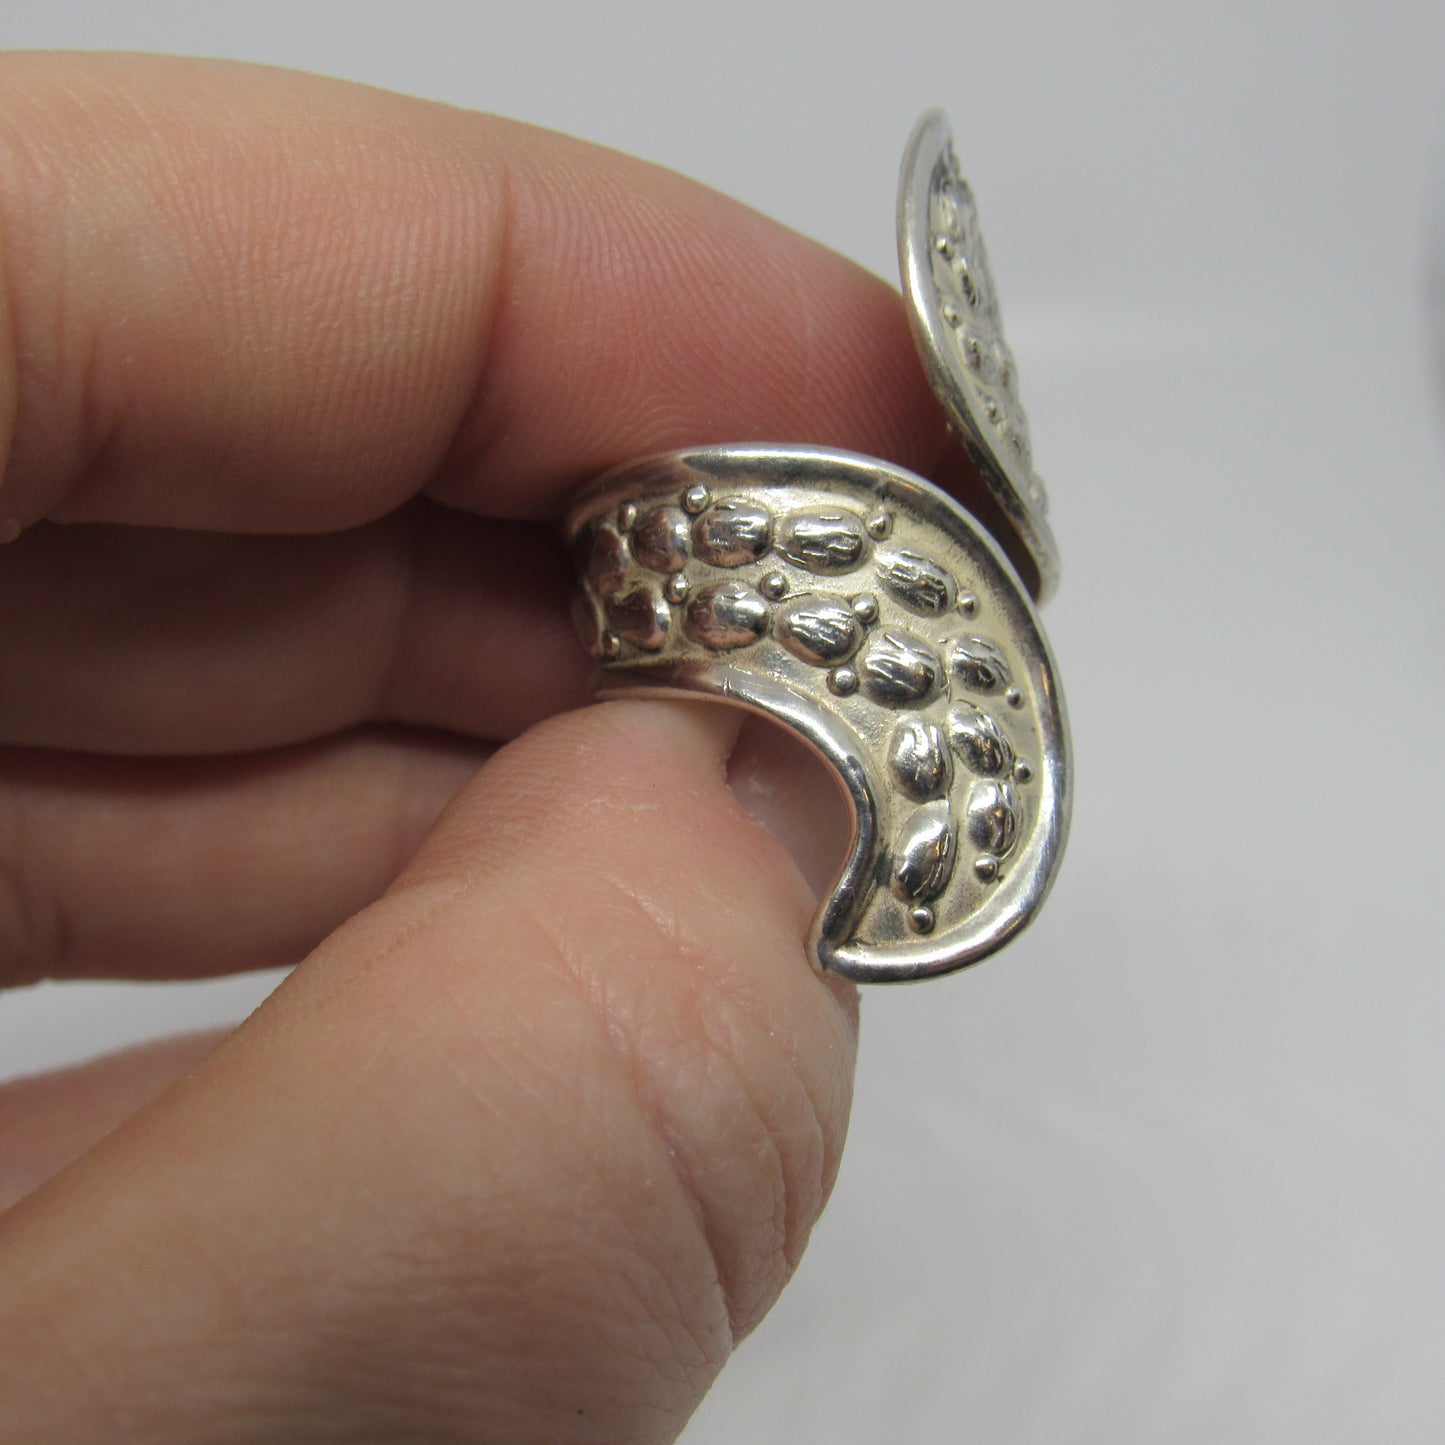 Vintage Taxco Mexico Sterling Silver 925 CBS Bypass Ring - Sz 8.25